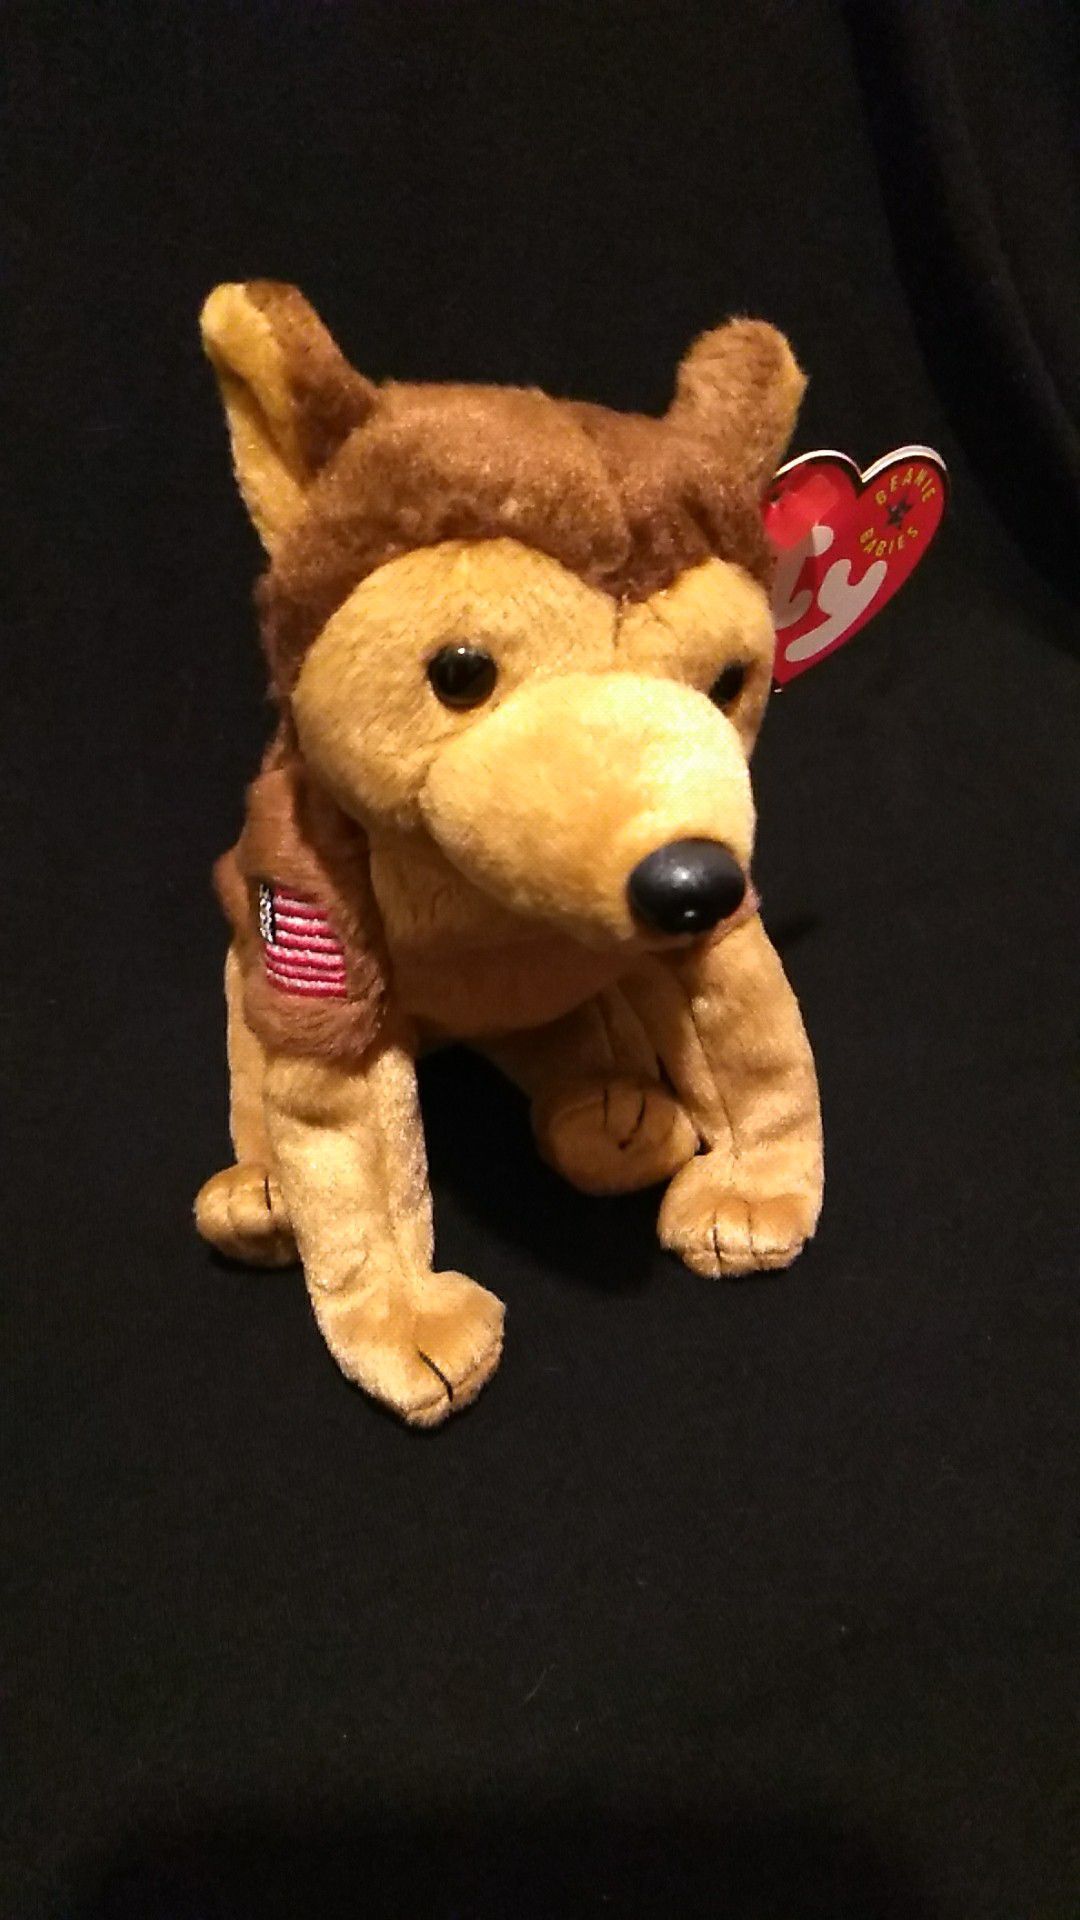 Mint Condition Retired 2001 Ty Beanie Babies Courage The German Shepherd With Flag NYPD September 11th Commemorative With Swing Tags